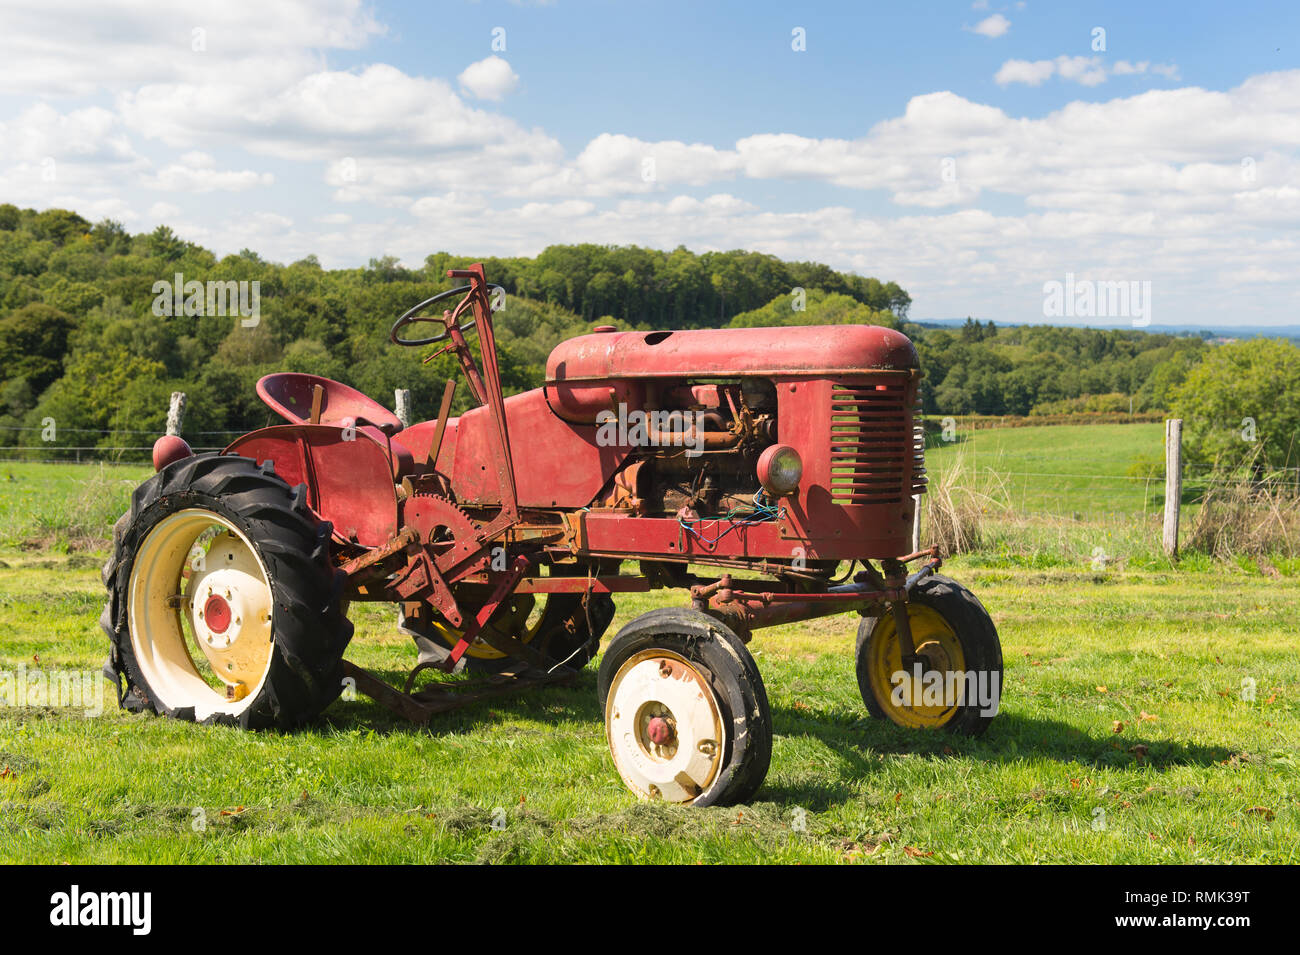 Old rusty vintage red tractor in agriculture landscape Stock Photo